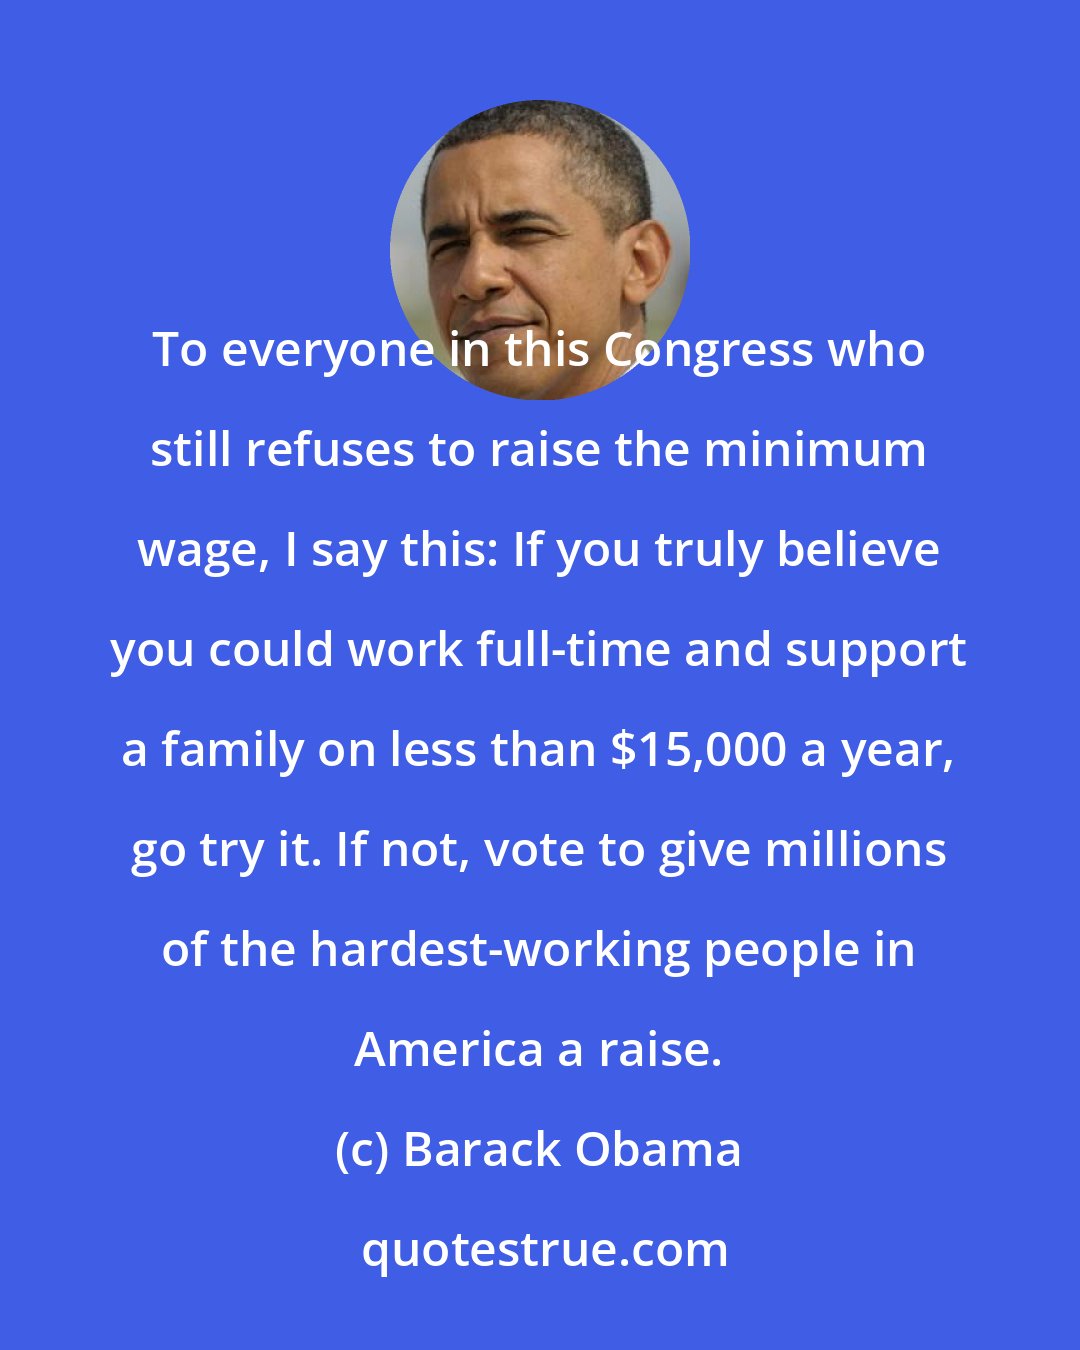 Barack Obama: To everyone in this Congress who still refuses to raise the minimum wage, I say this: If you truly believe you could work full-time and support a family on less than $15,000 a year, go try it. If not, vote to give millions of the hardest-working people in America a raise.